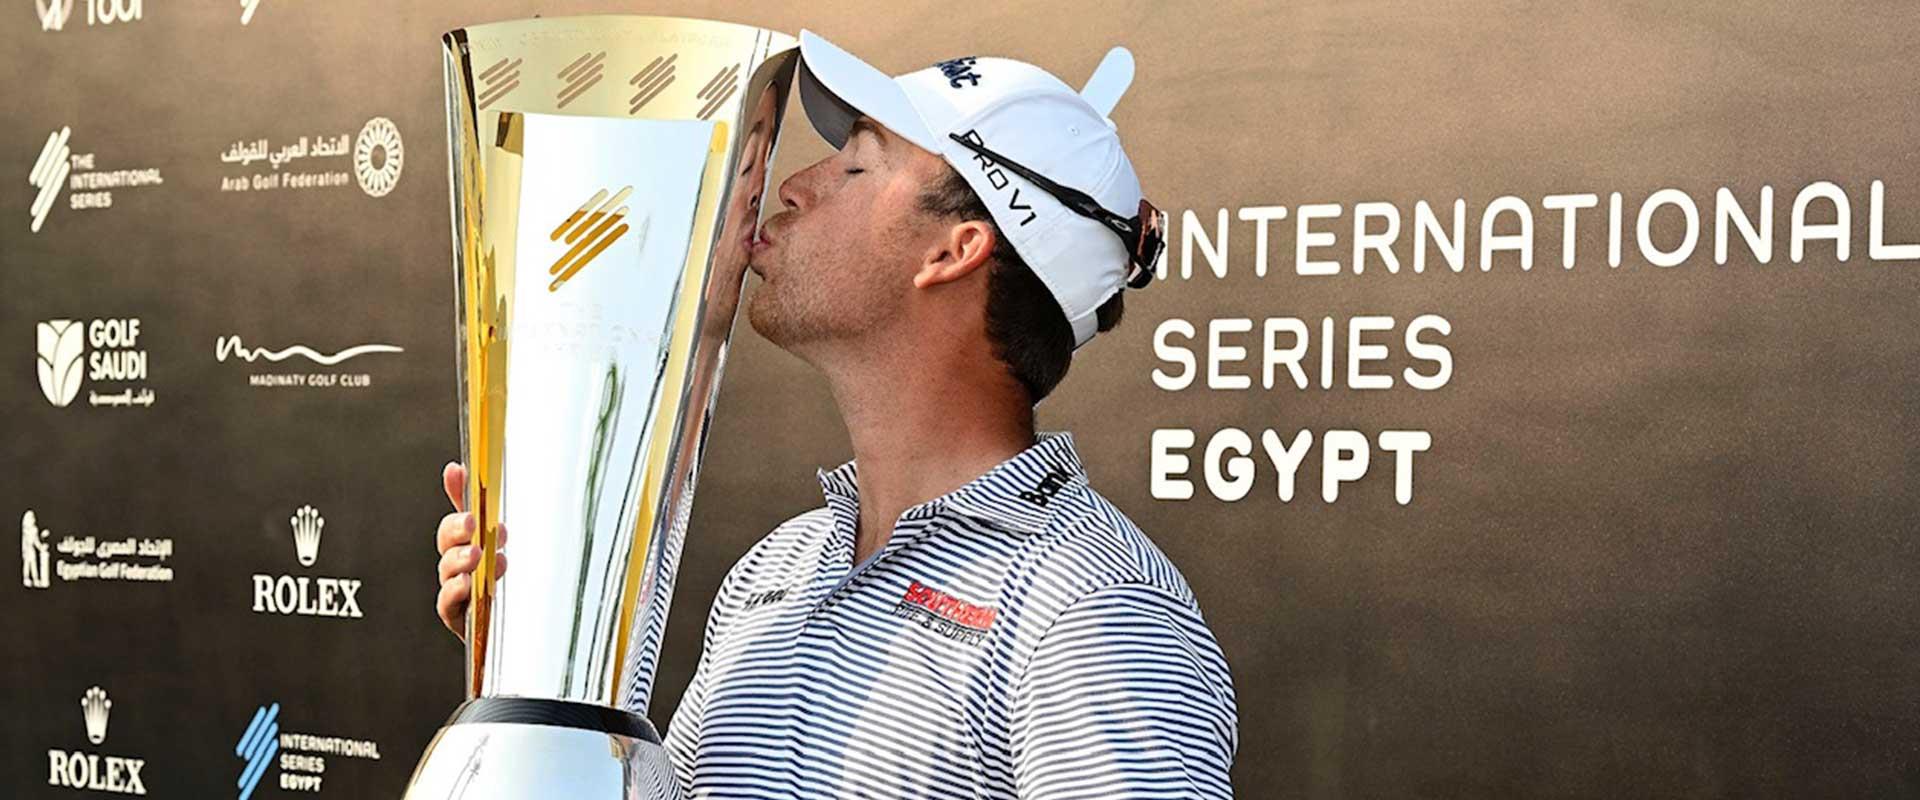 Ogletree cruises to first professional win at International Series Egypt